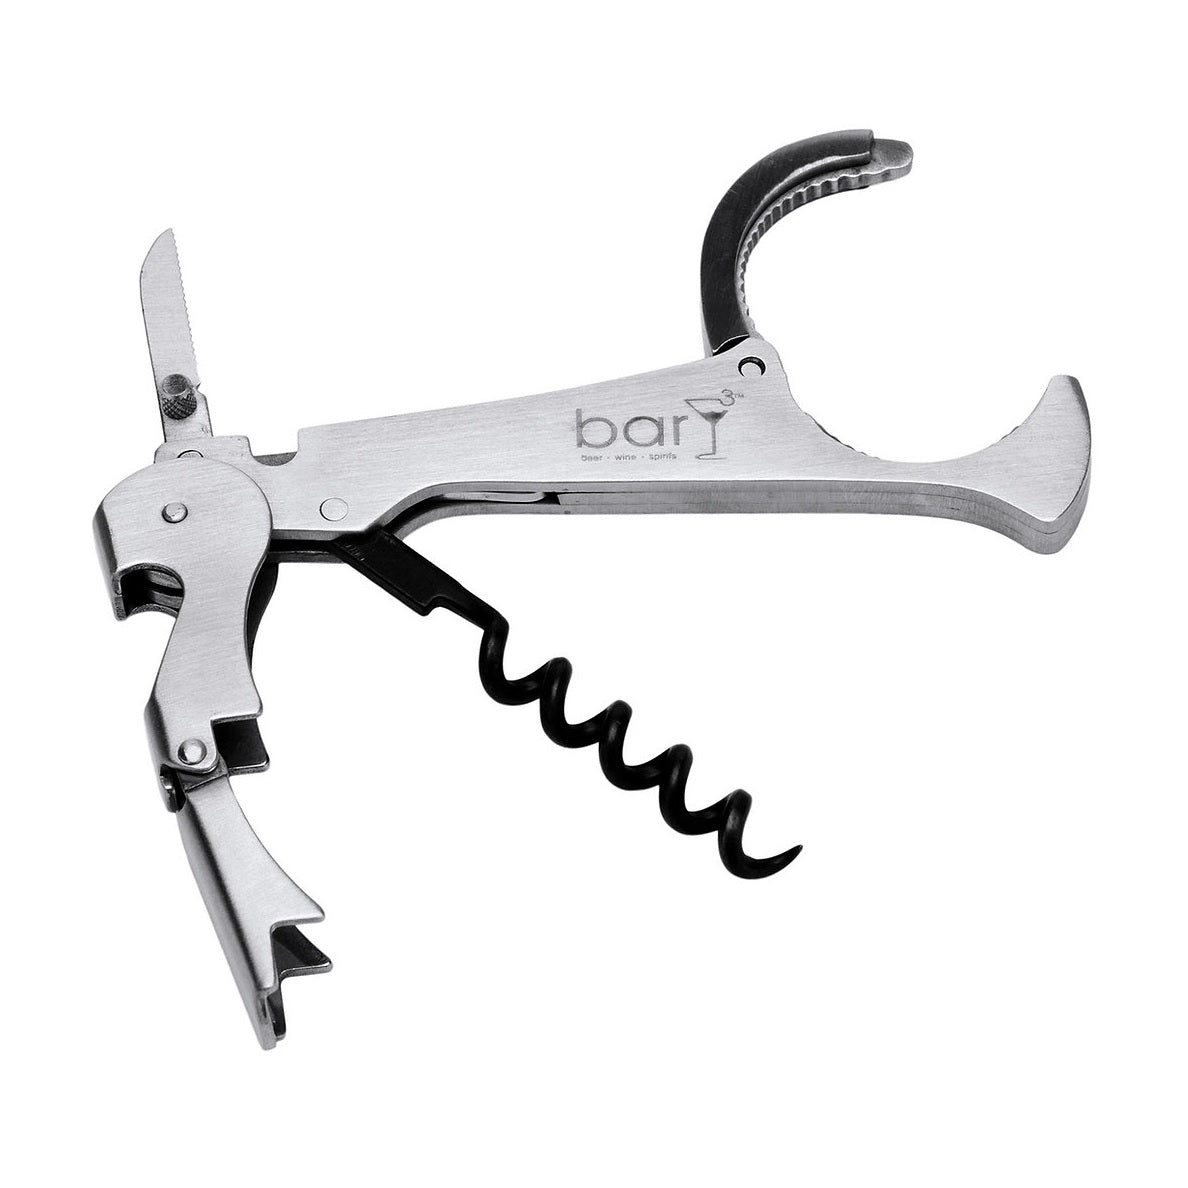 BarY3 BAR-0142 Waiter's Corkscrew With Foil Cutter, Stainless Steel